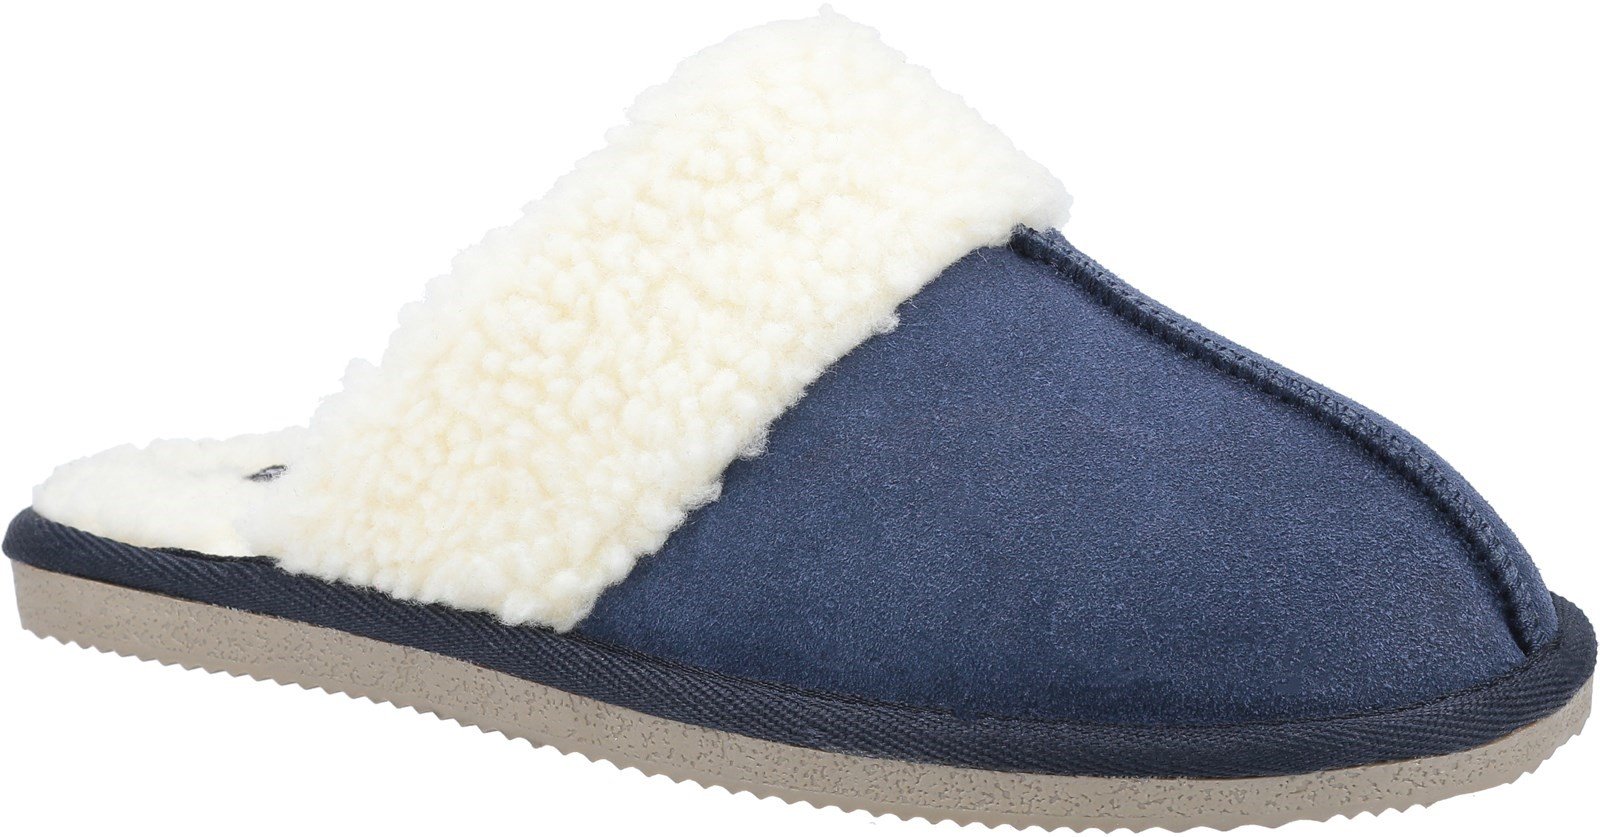 Hush Puppies Women's Arianna Mule Slippers Various Colours 31183 - Navy 3